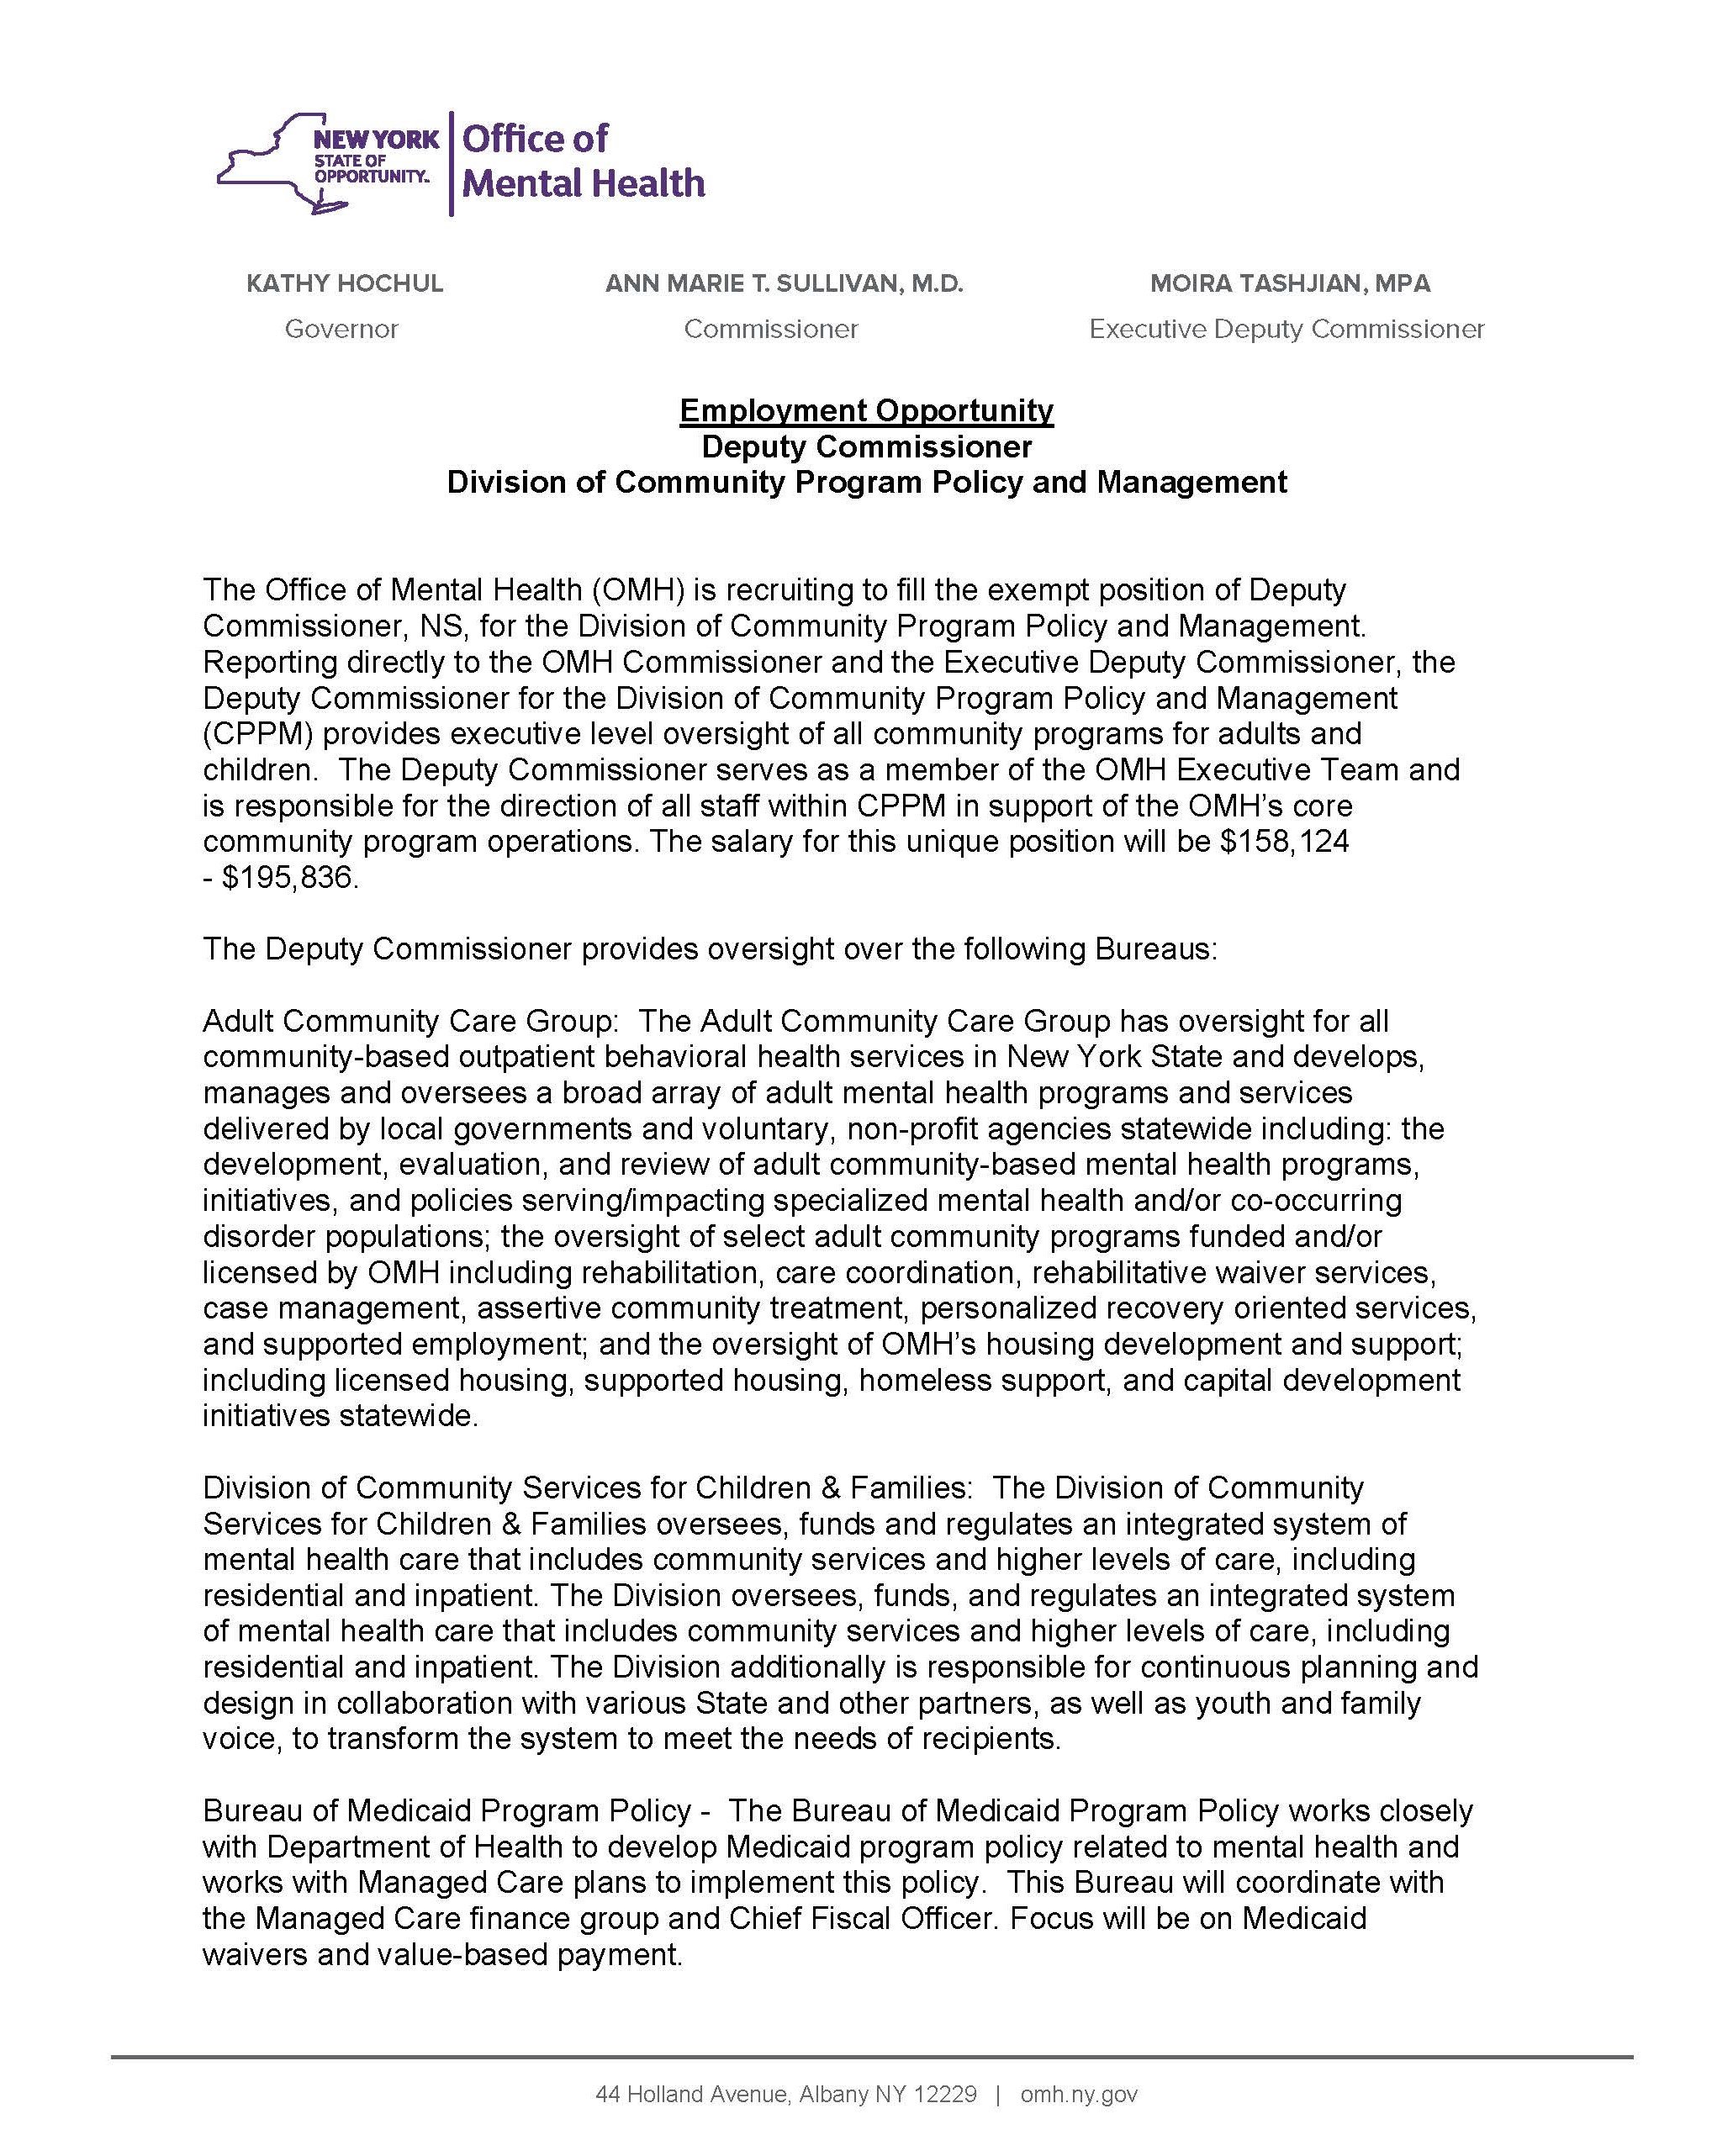 DeputyComm - Division of Community Program Policy and Management_Page_1.jpg